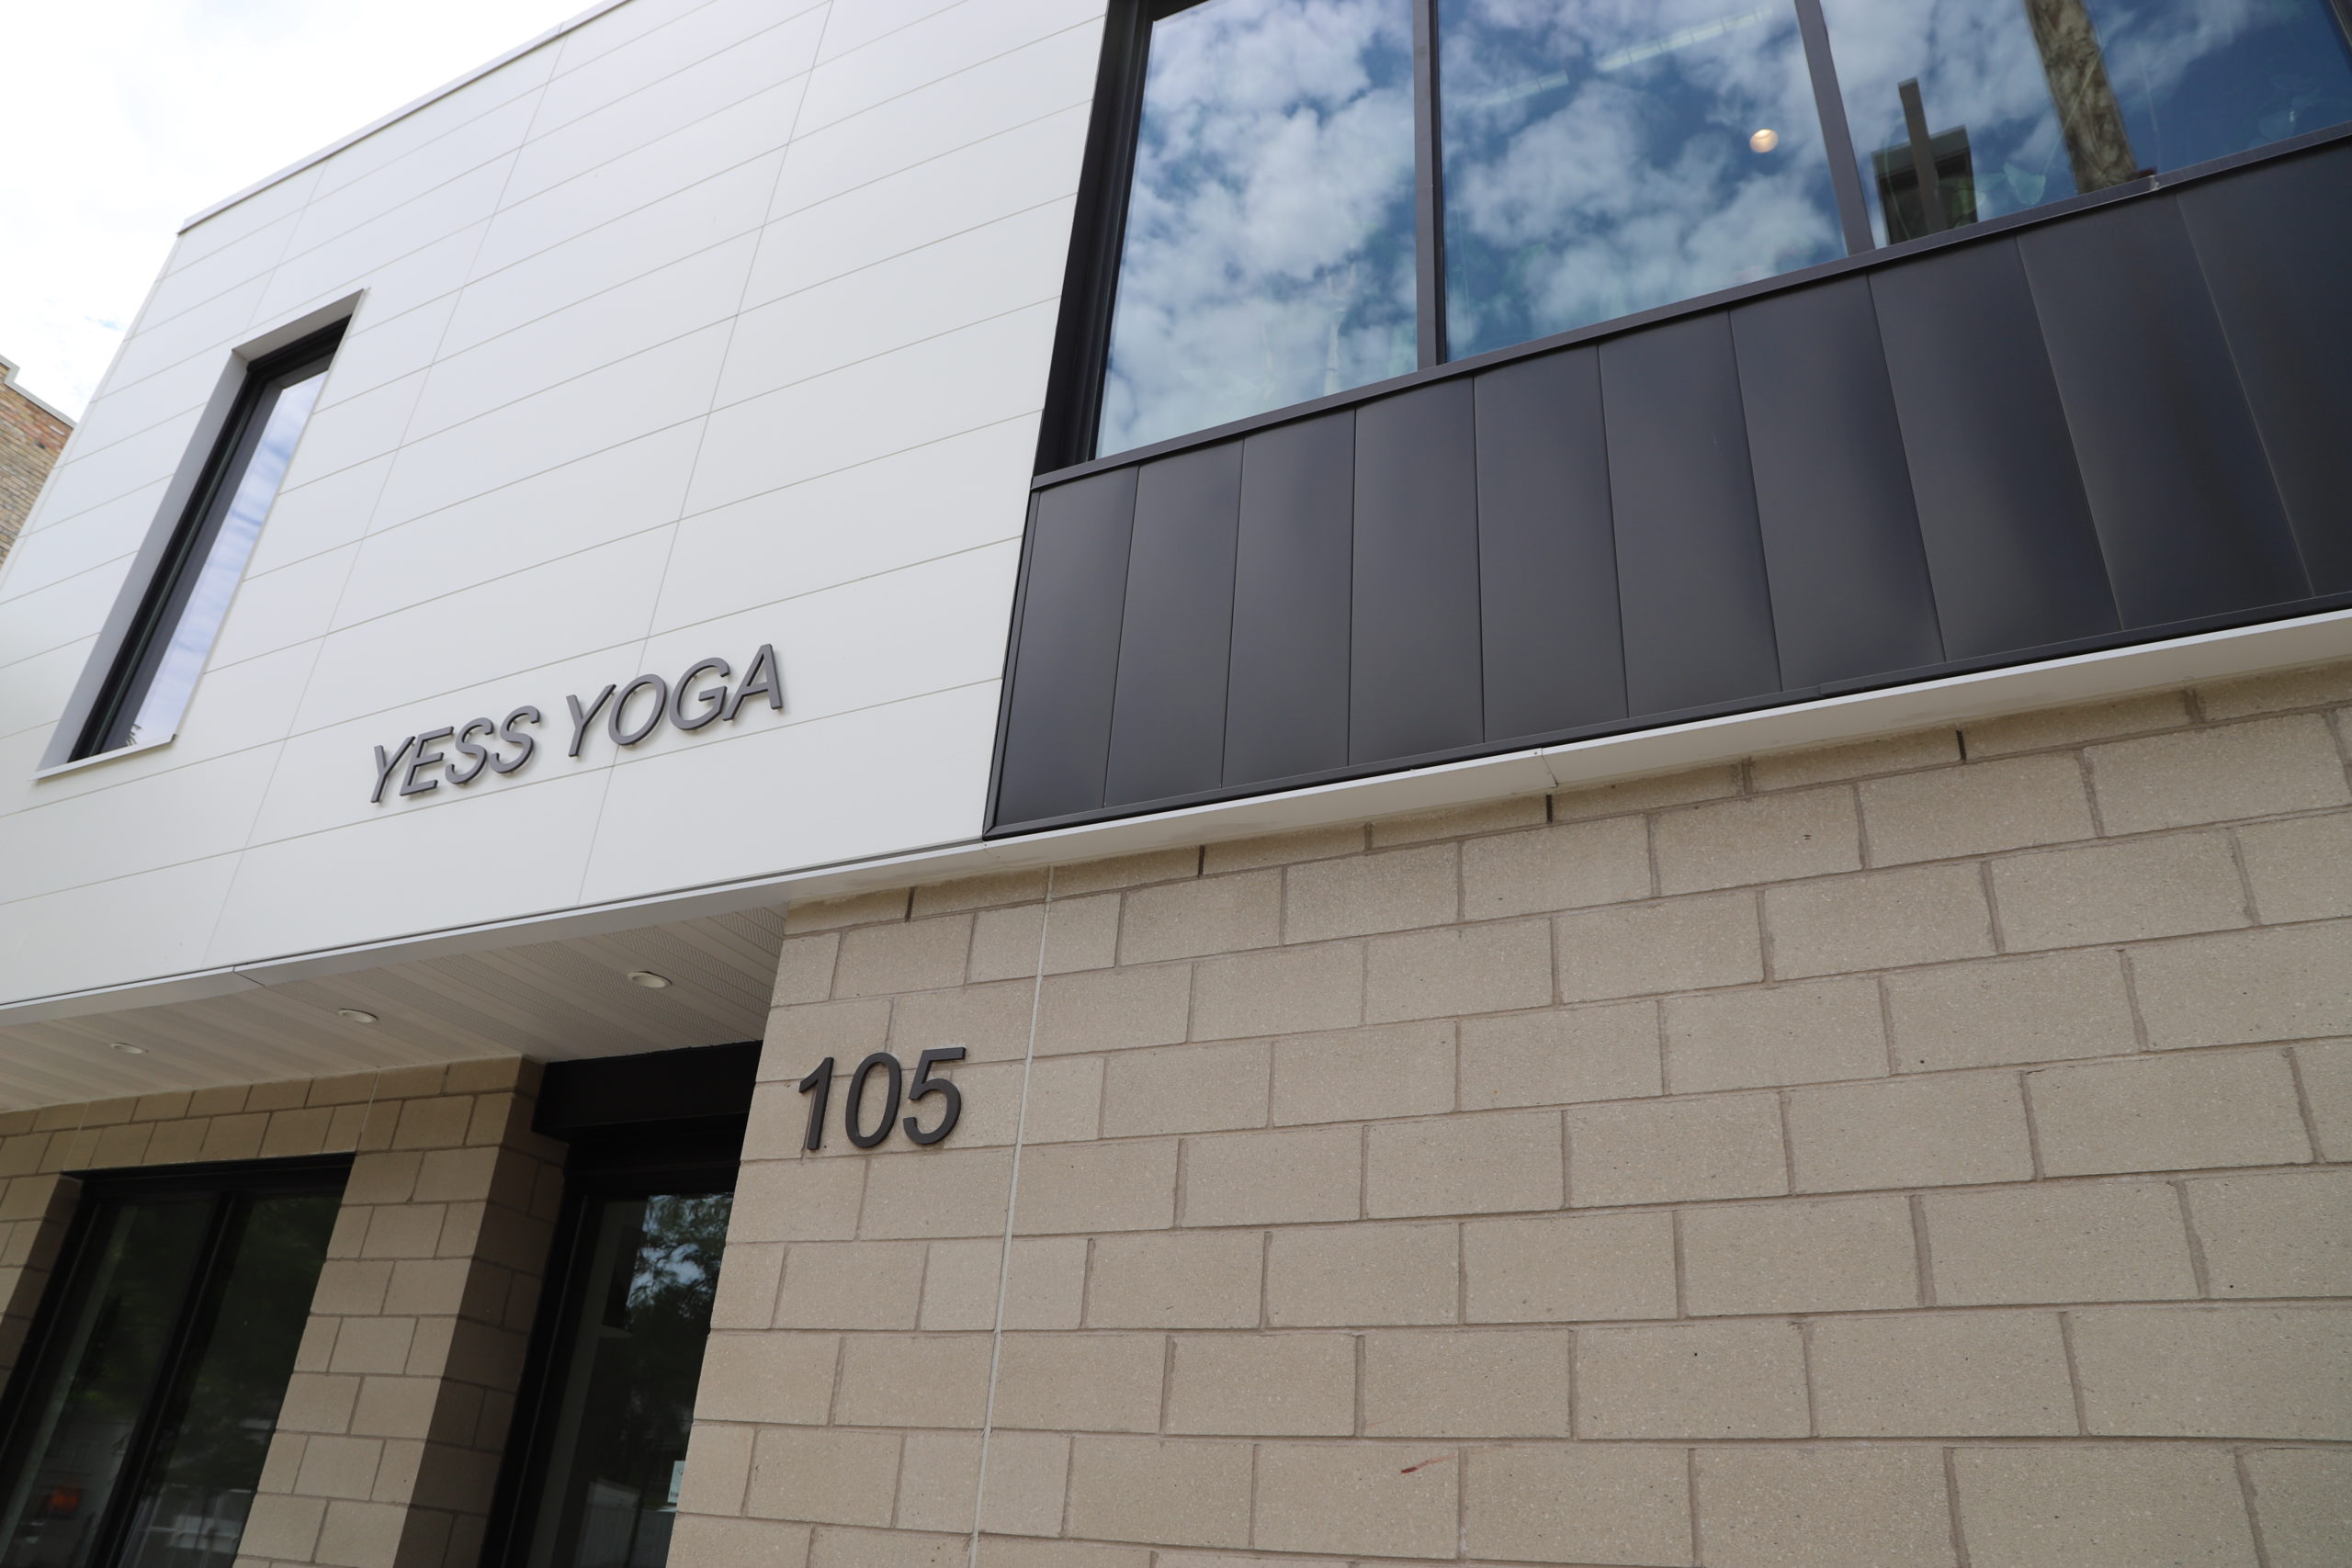 The corner of a two story building with a sign that says "Yess Yoga" on the side in Minneapolis, MN.